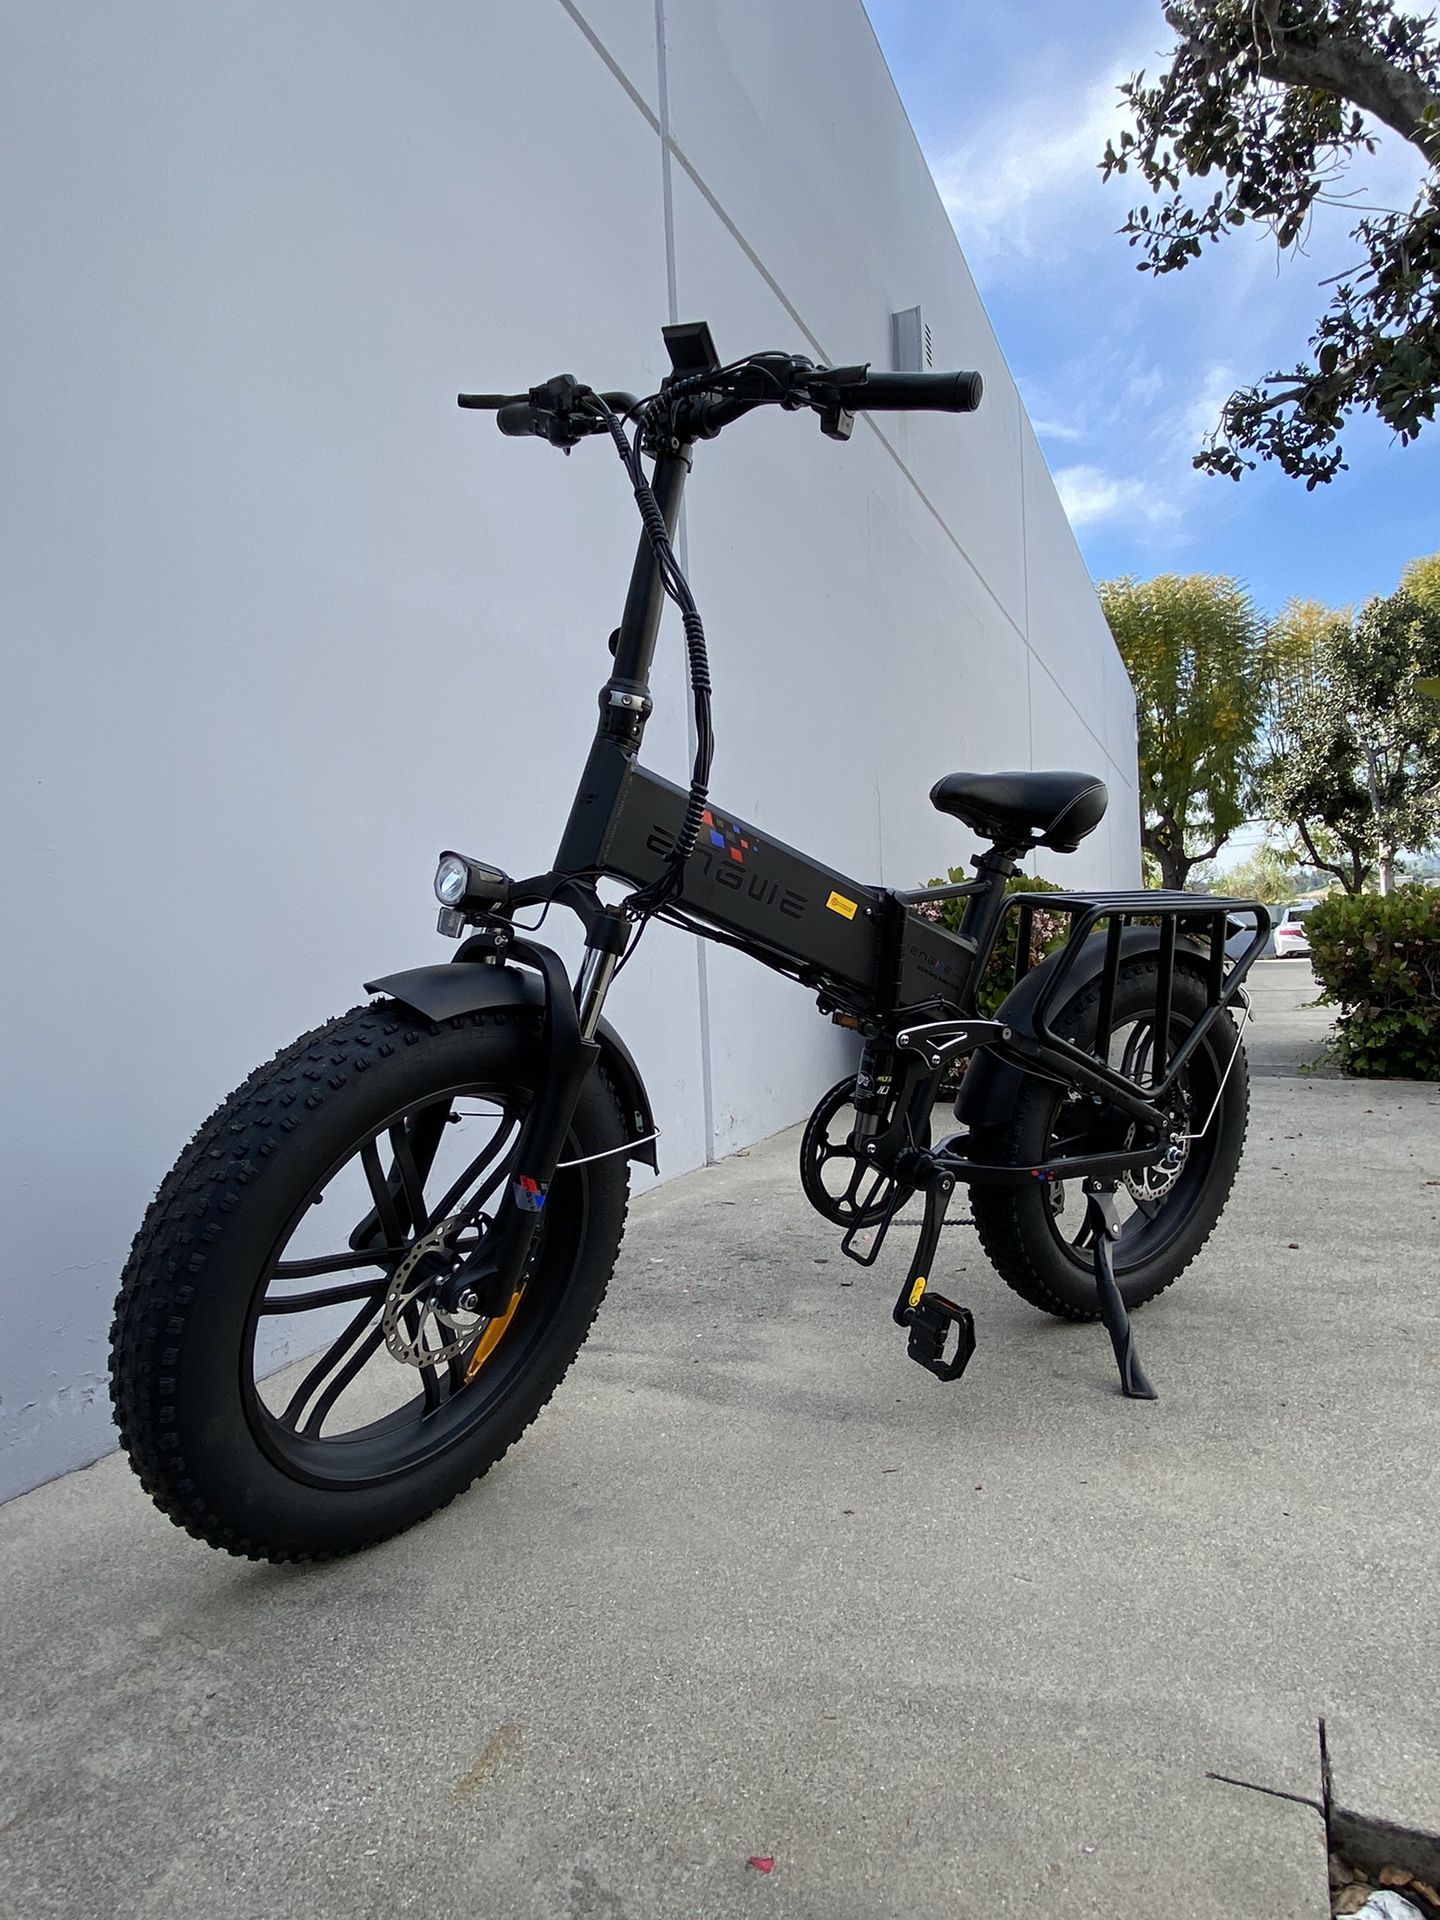 ENGWE engine pro Folding E-bike for Adults 750W 48V16Ah top speed 30mph range up to 75 miles, electric bike 